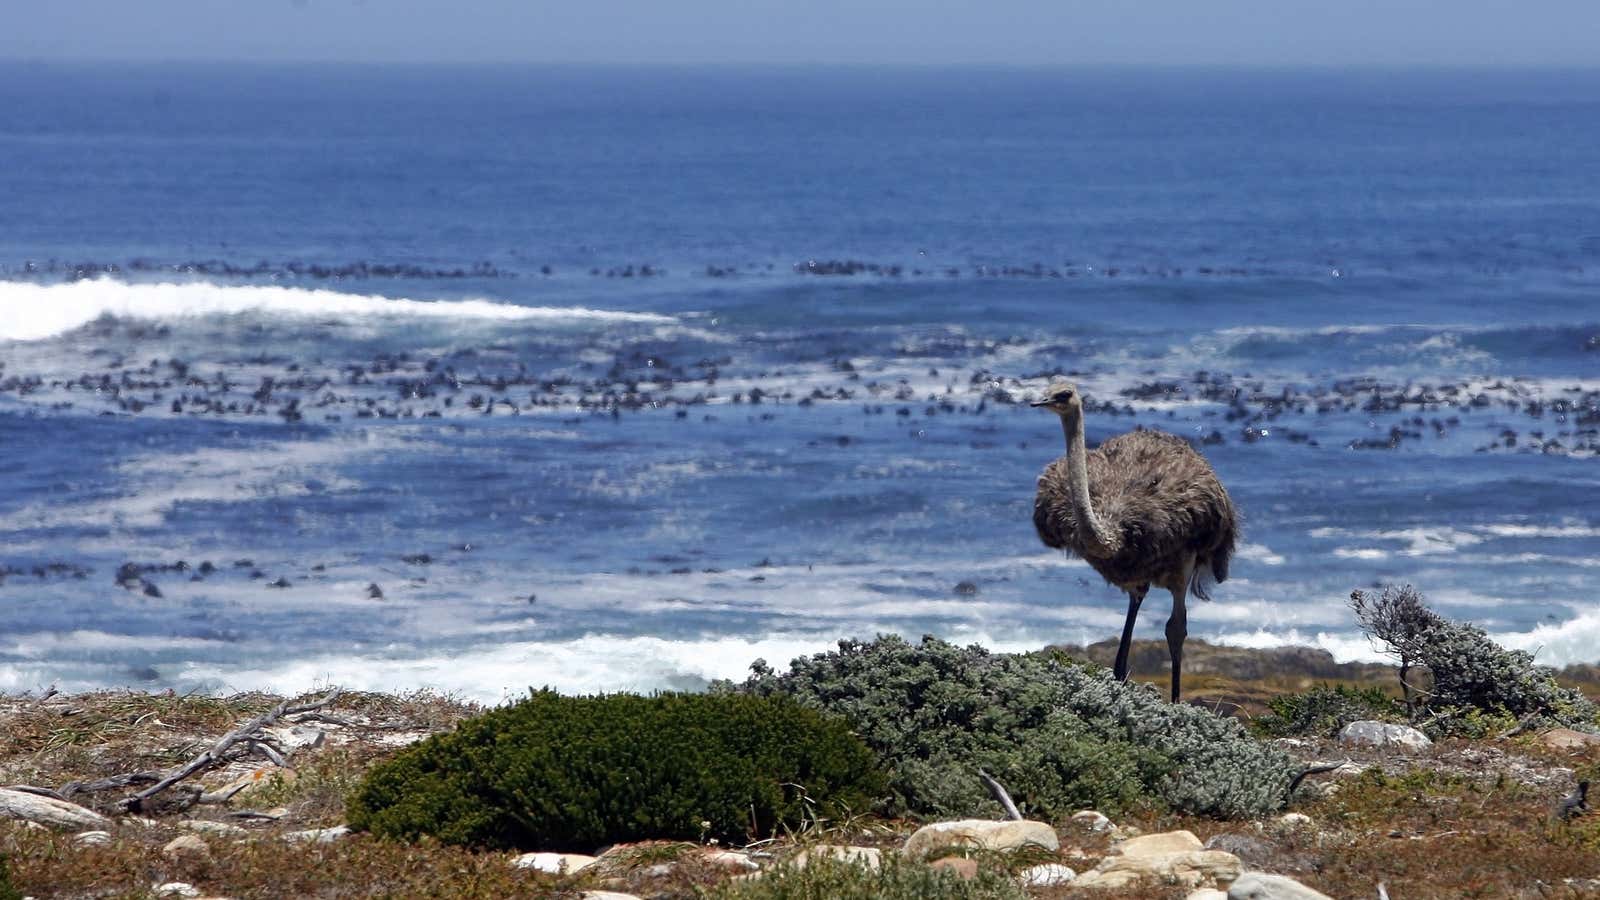 An ostrich walks next to the Atlantic Ocean at South Africa’s Cape of Good Hope.. Few people know that the southern Atlantic Ocean was once referred by mapmakers as the Ethiopian ocean.